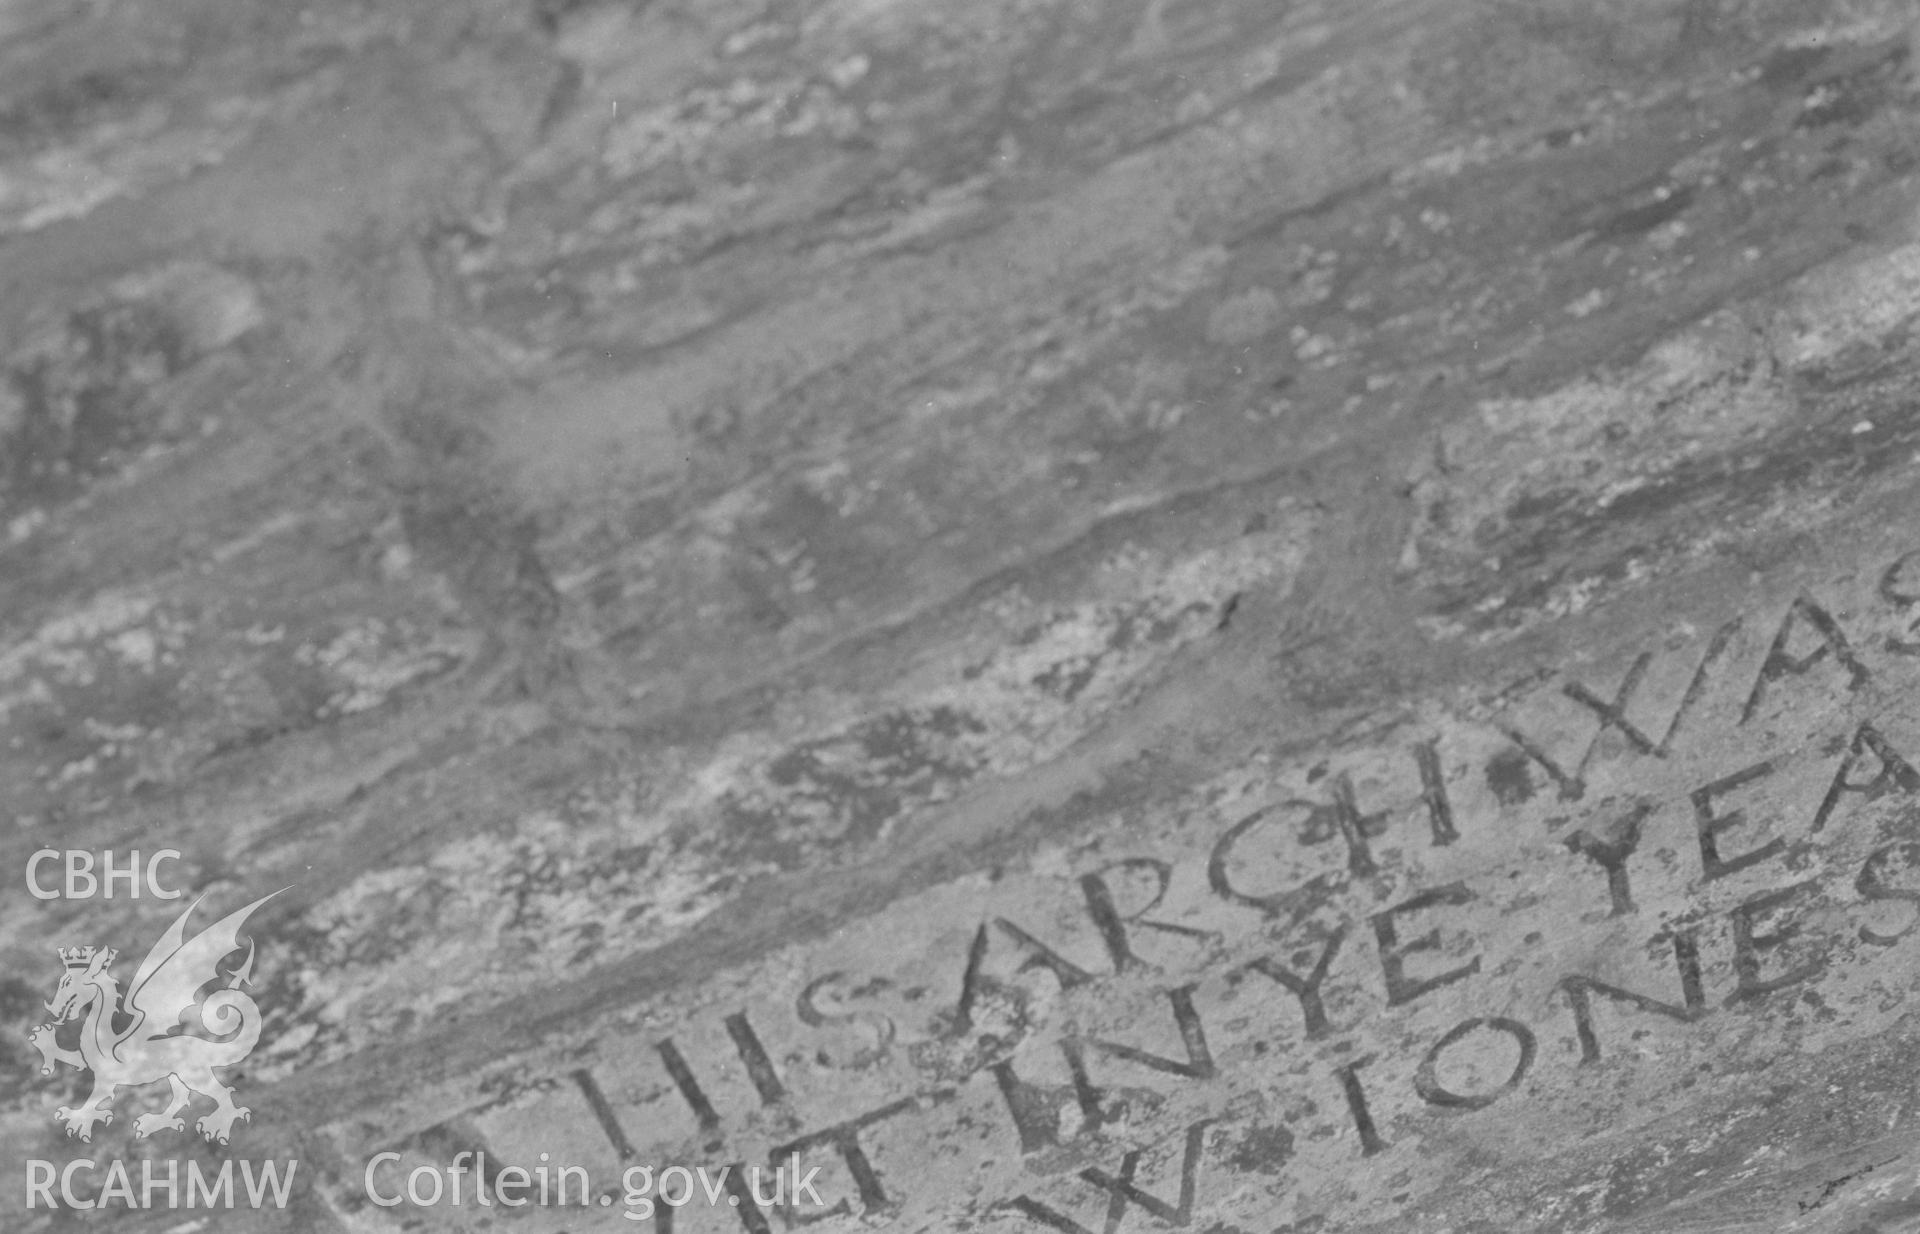 Digital copy of a black and white negative showing inscription dated 1726 on east side of east parapet of Cardigan Bridge, over cut-water on upstream side. Photographed by Arthur O. Chater on 9th April 1968 from Grid Reference SN 178 458.